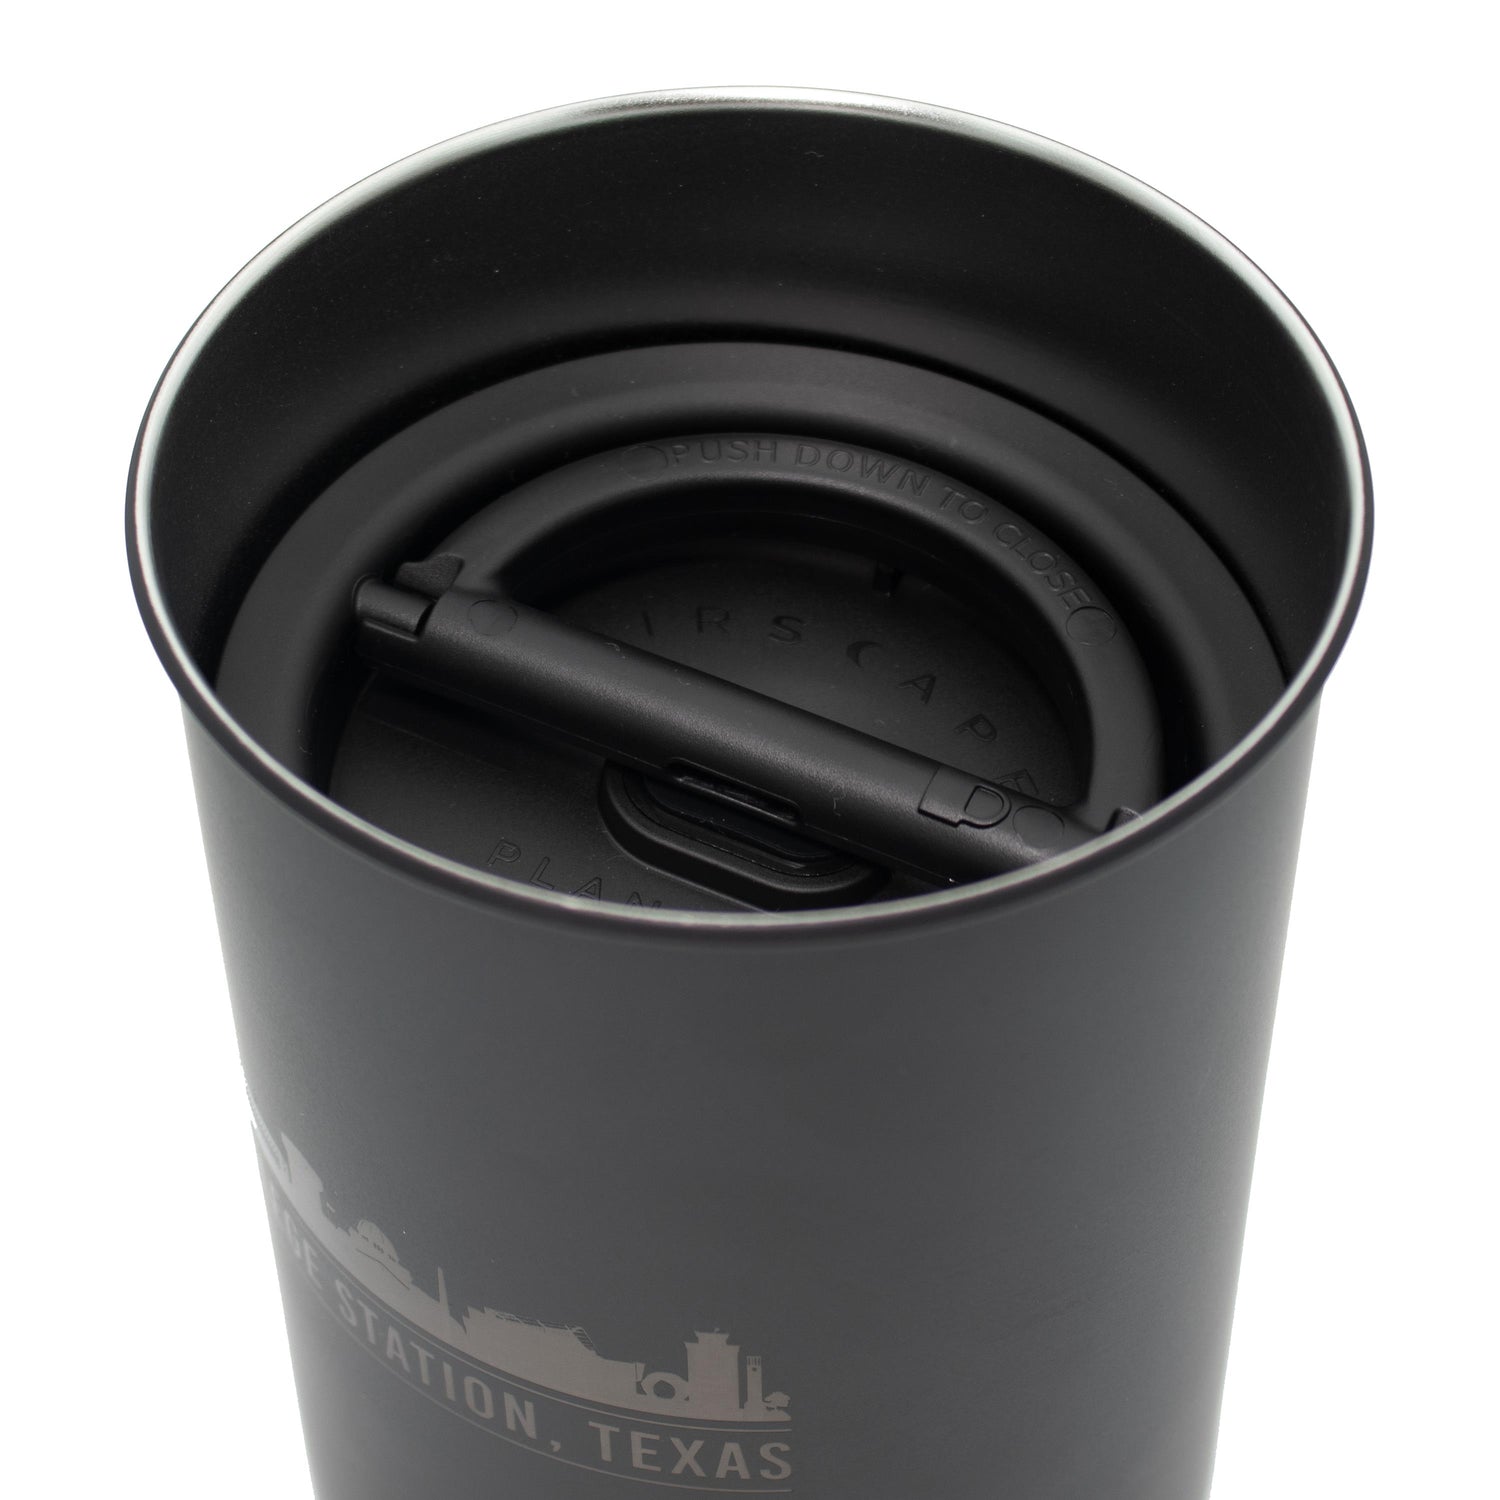 Texas A&M Campus Landscape Stainless Matte Black Canister